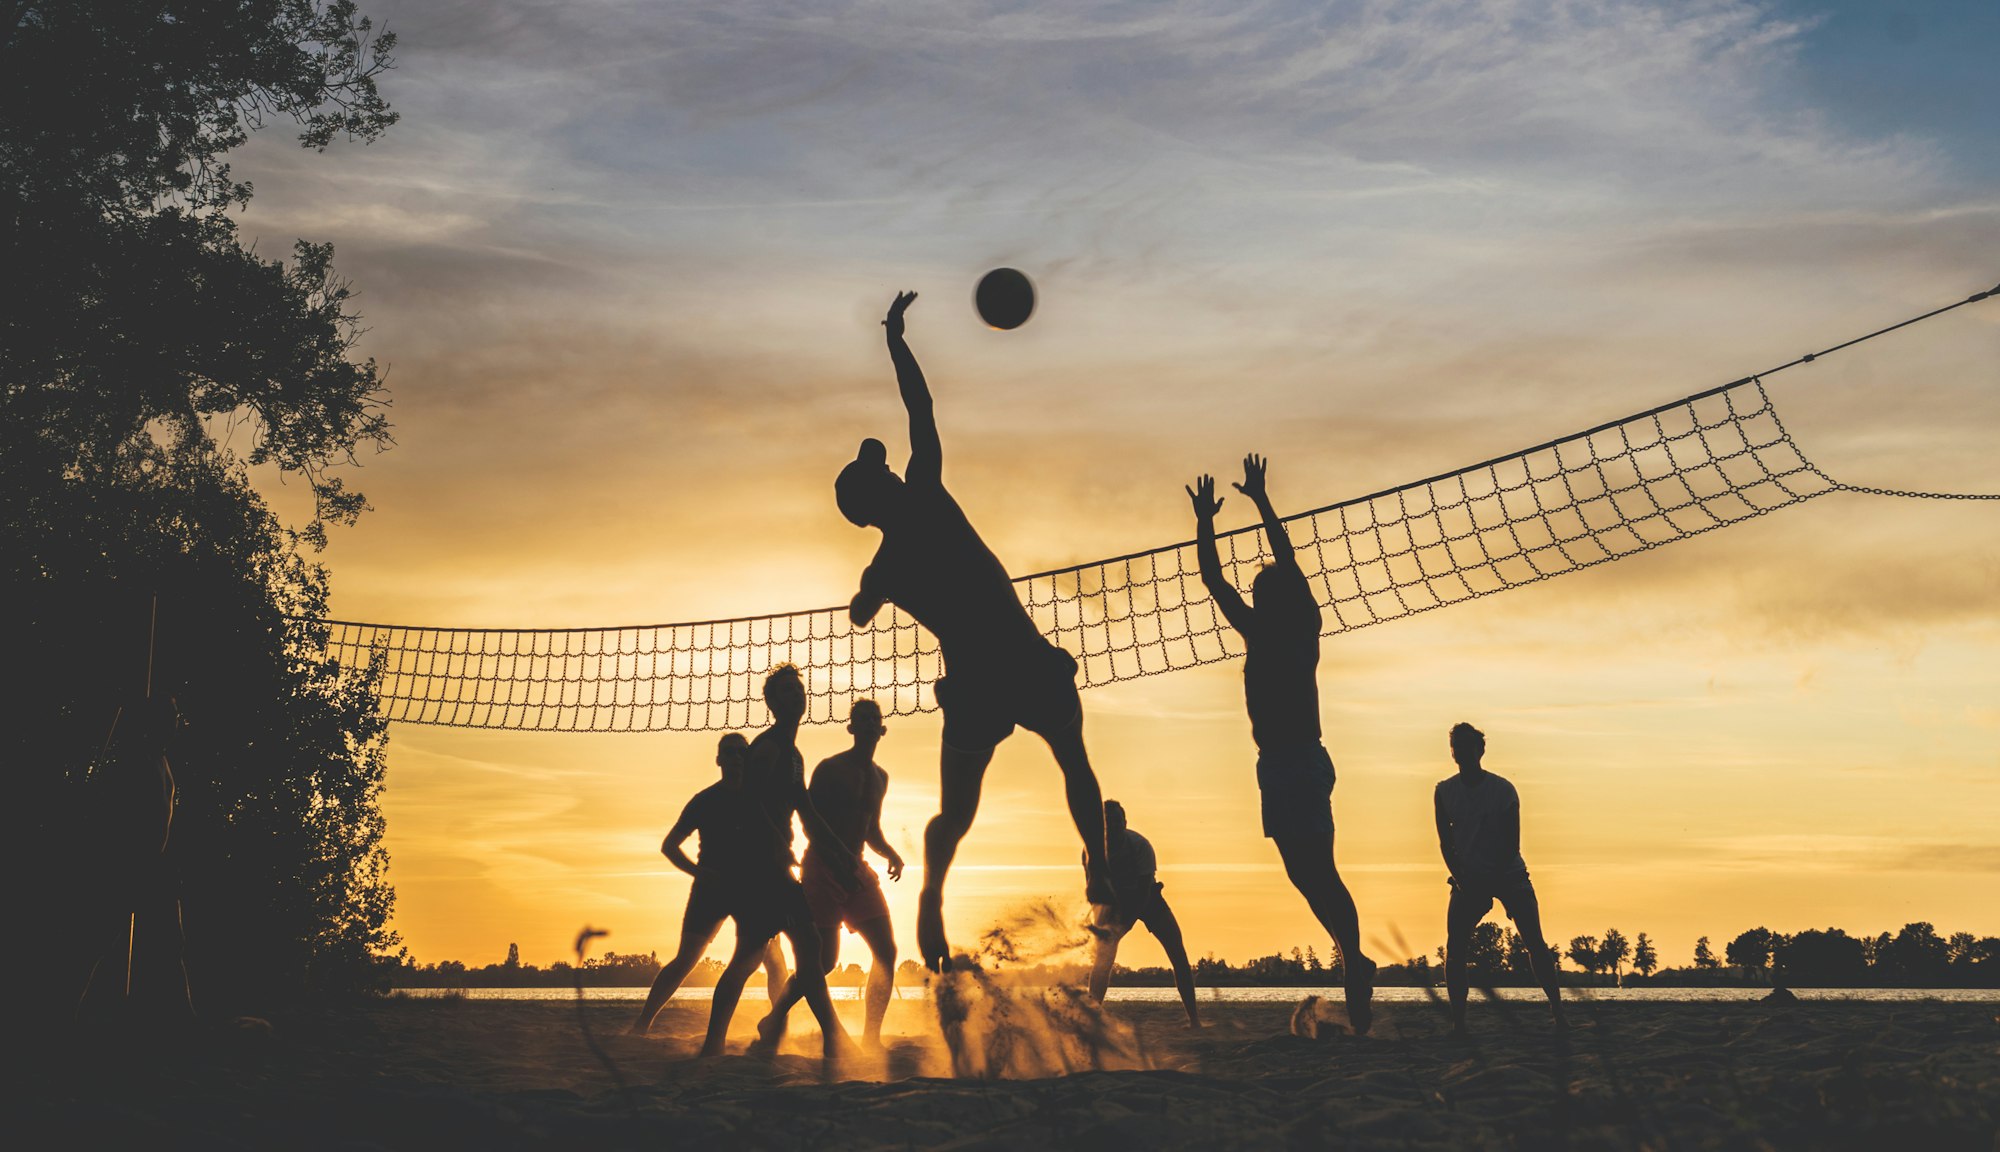 A group of friends play beach volleyball while the sun is setting. Taken on a warm summer evening at the Loosdrechtse Plassen in the Netherlands.